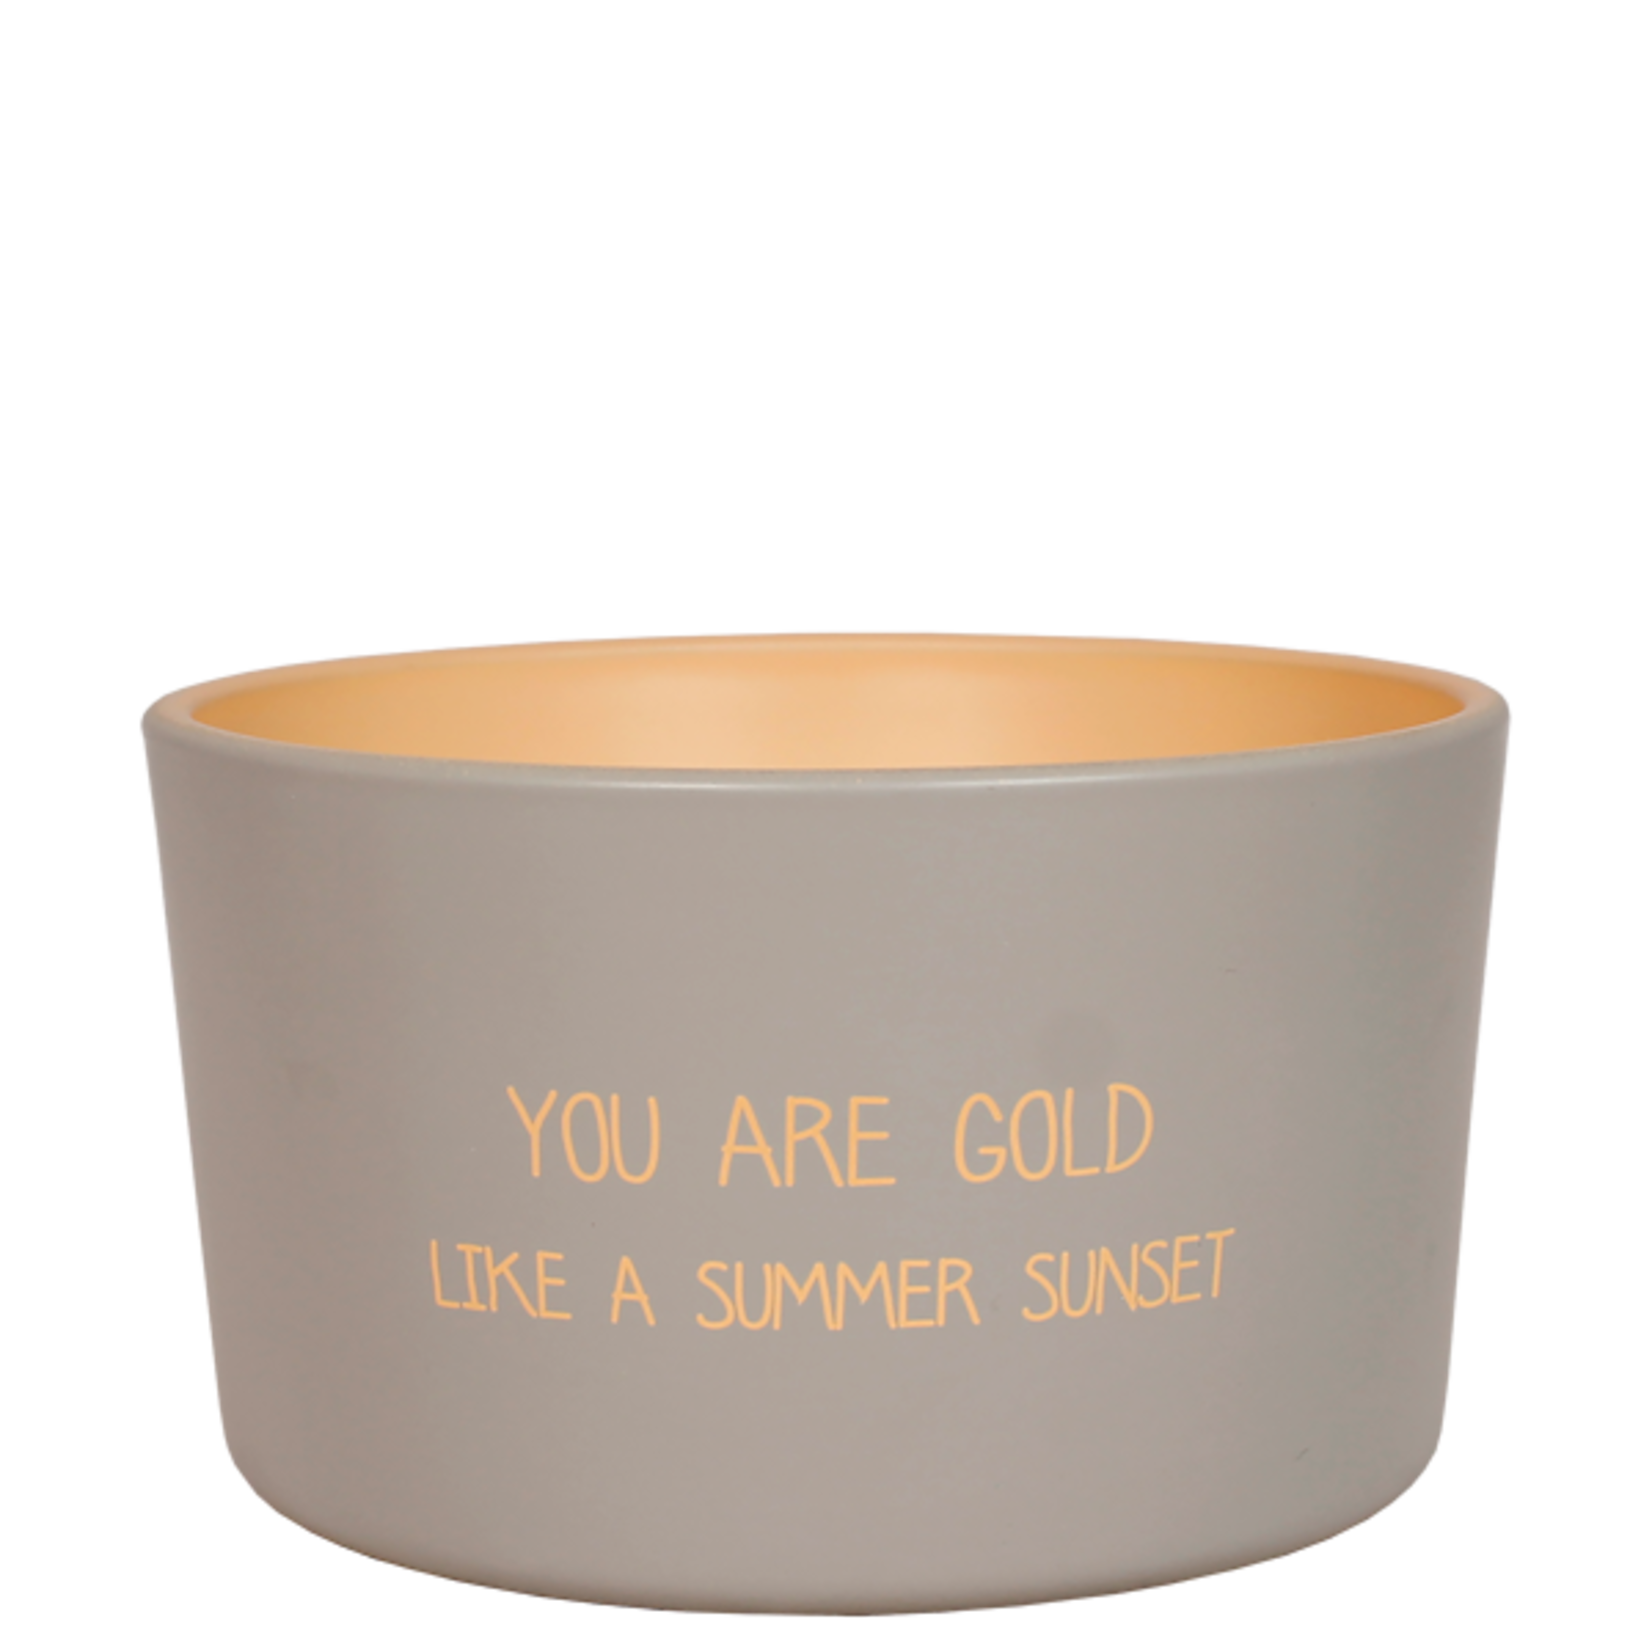 My Flame Buitenkaars - You are gold like a summer sunset - Bella Citronella